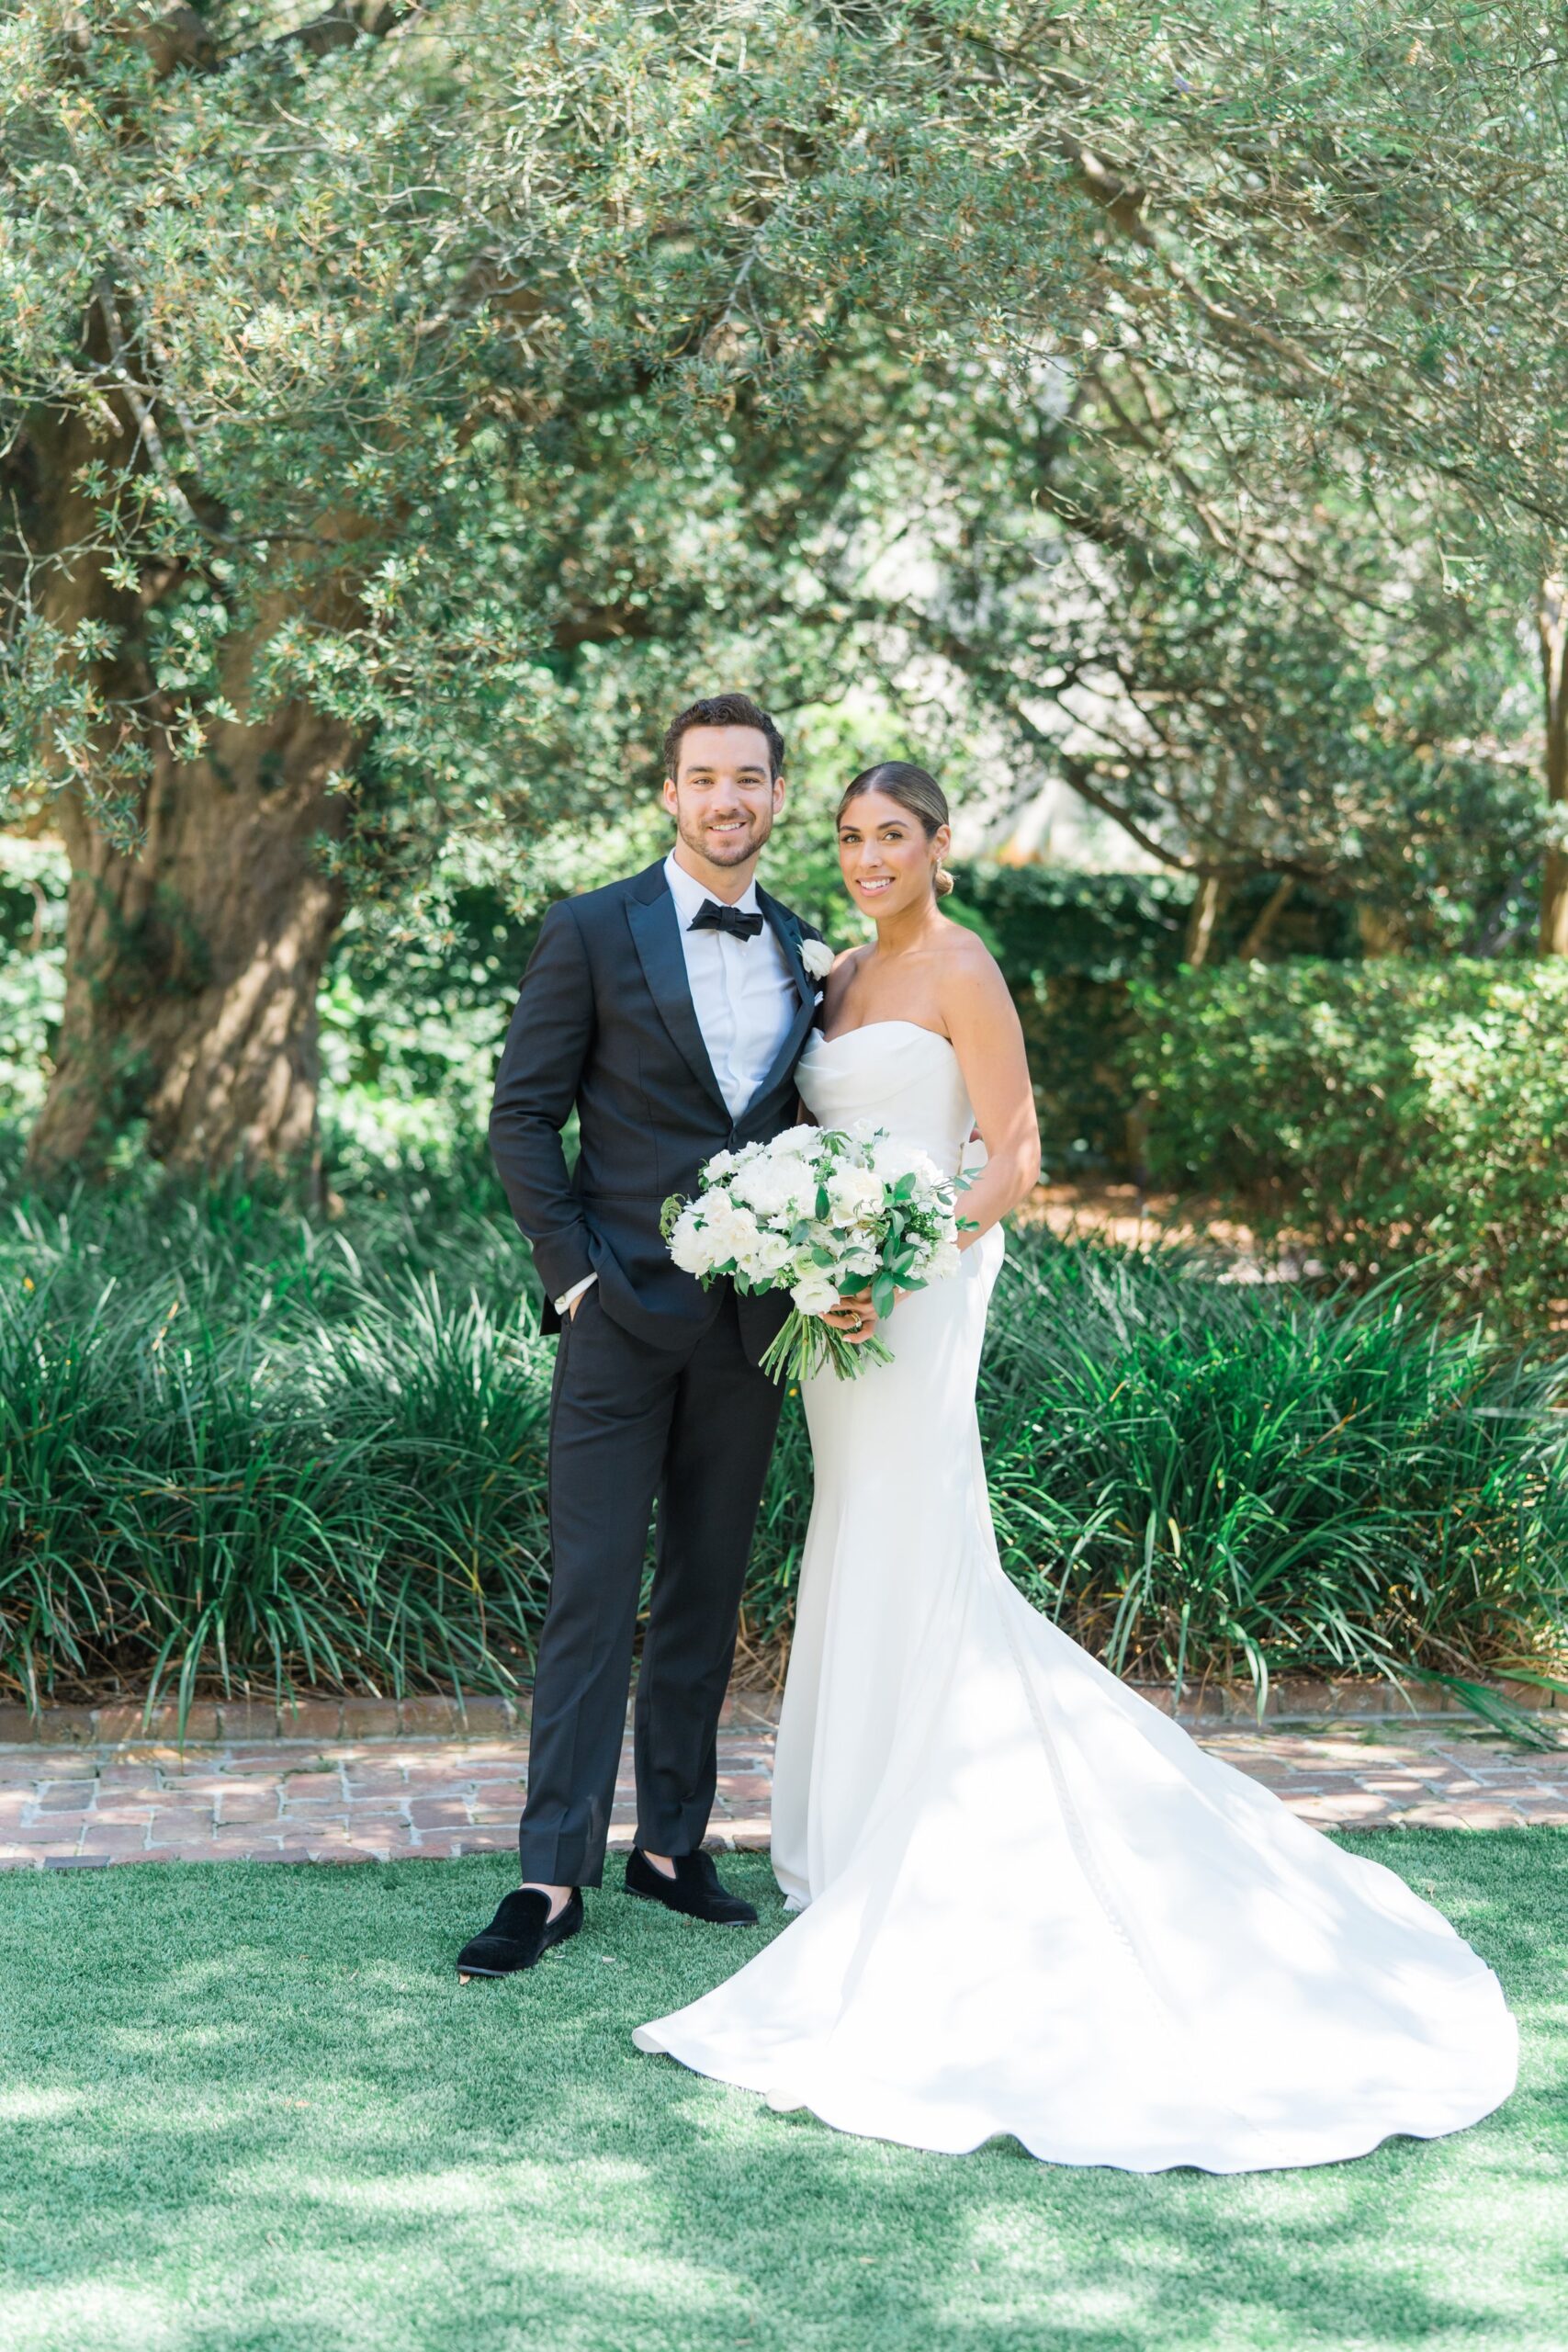 Natural lighting wedding day portraits. Light and airy bride and groom portraits at Charleston wedding venue.